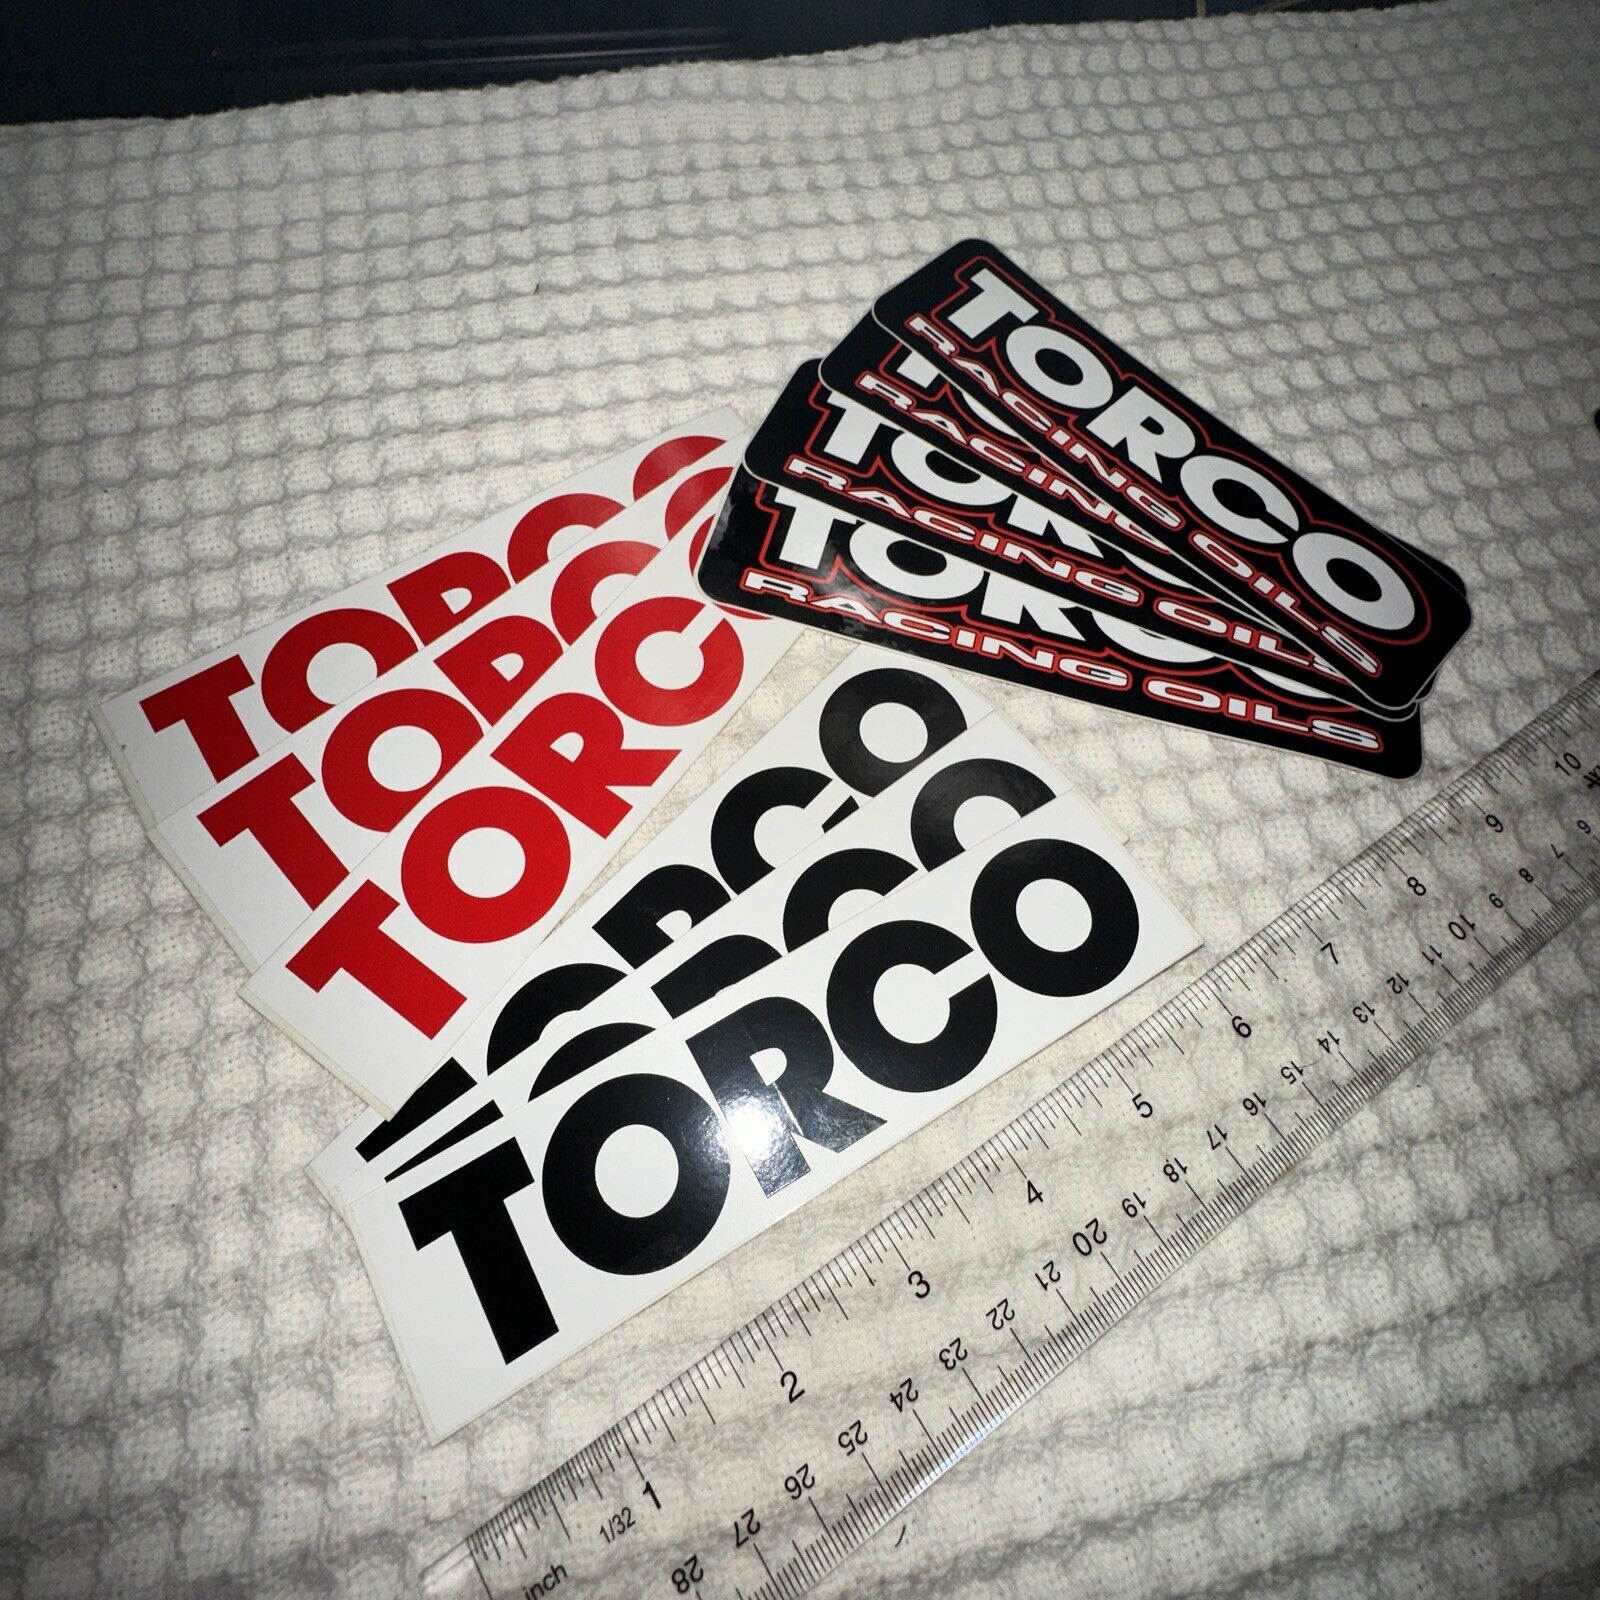 9 Vintage Torco Racing Oils Decal Sticker’s